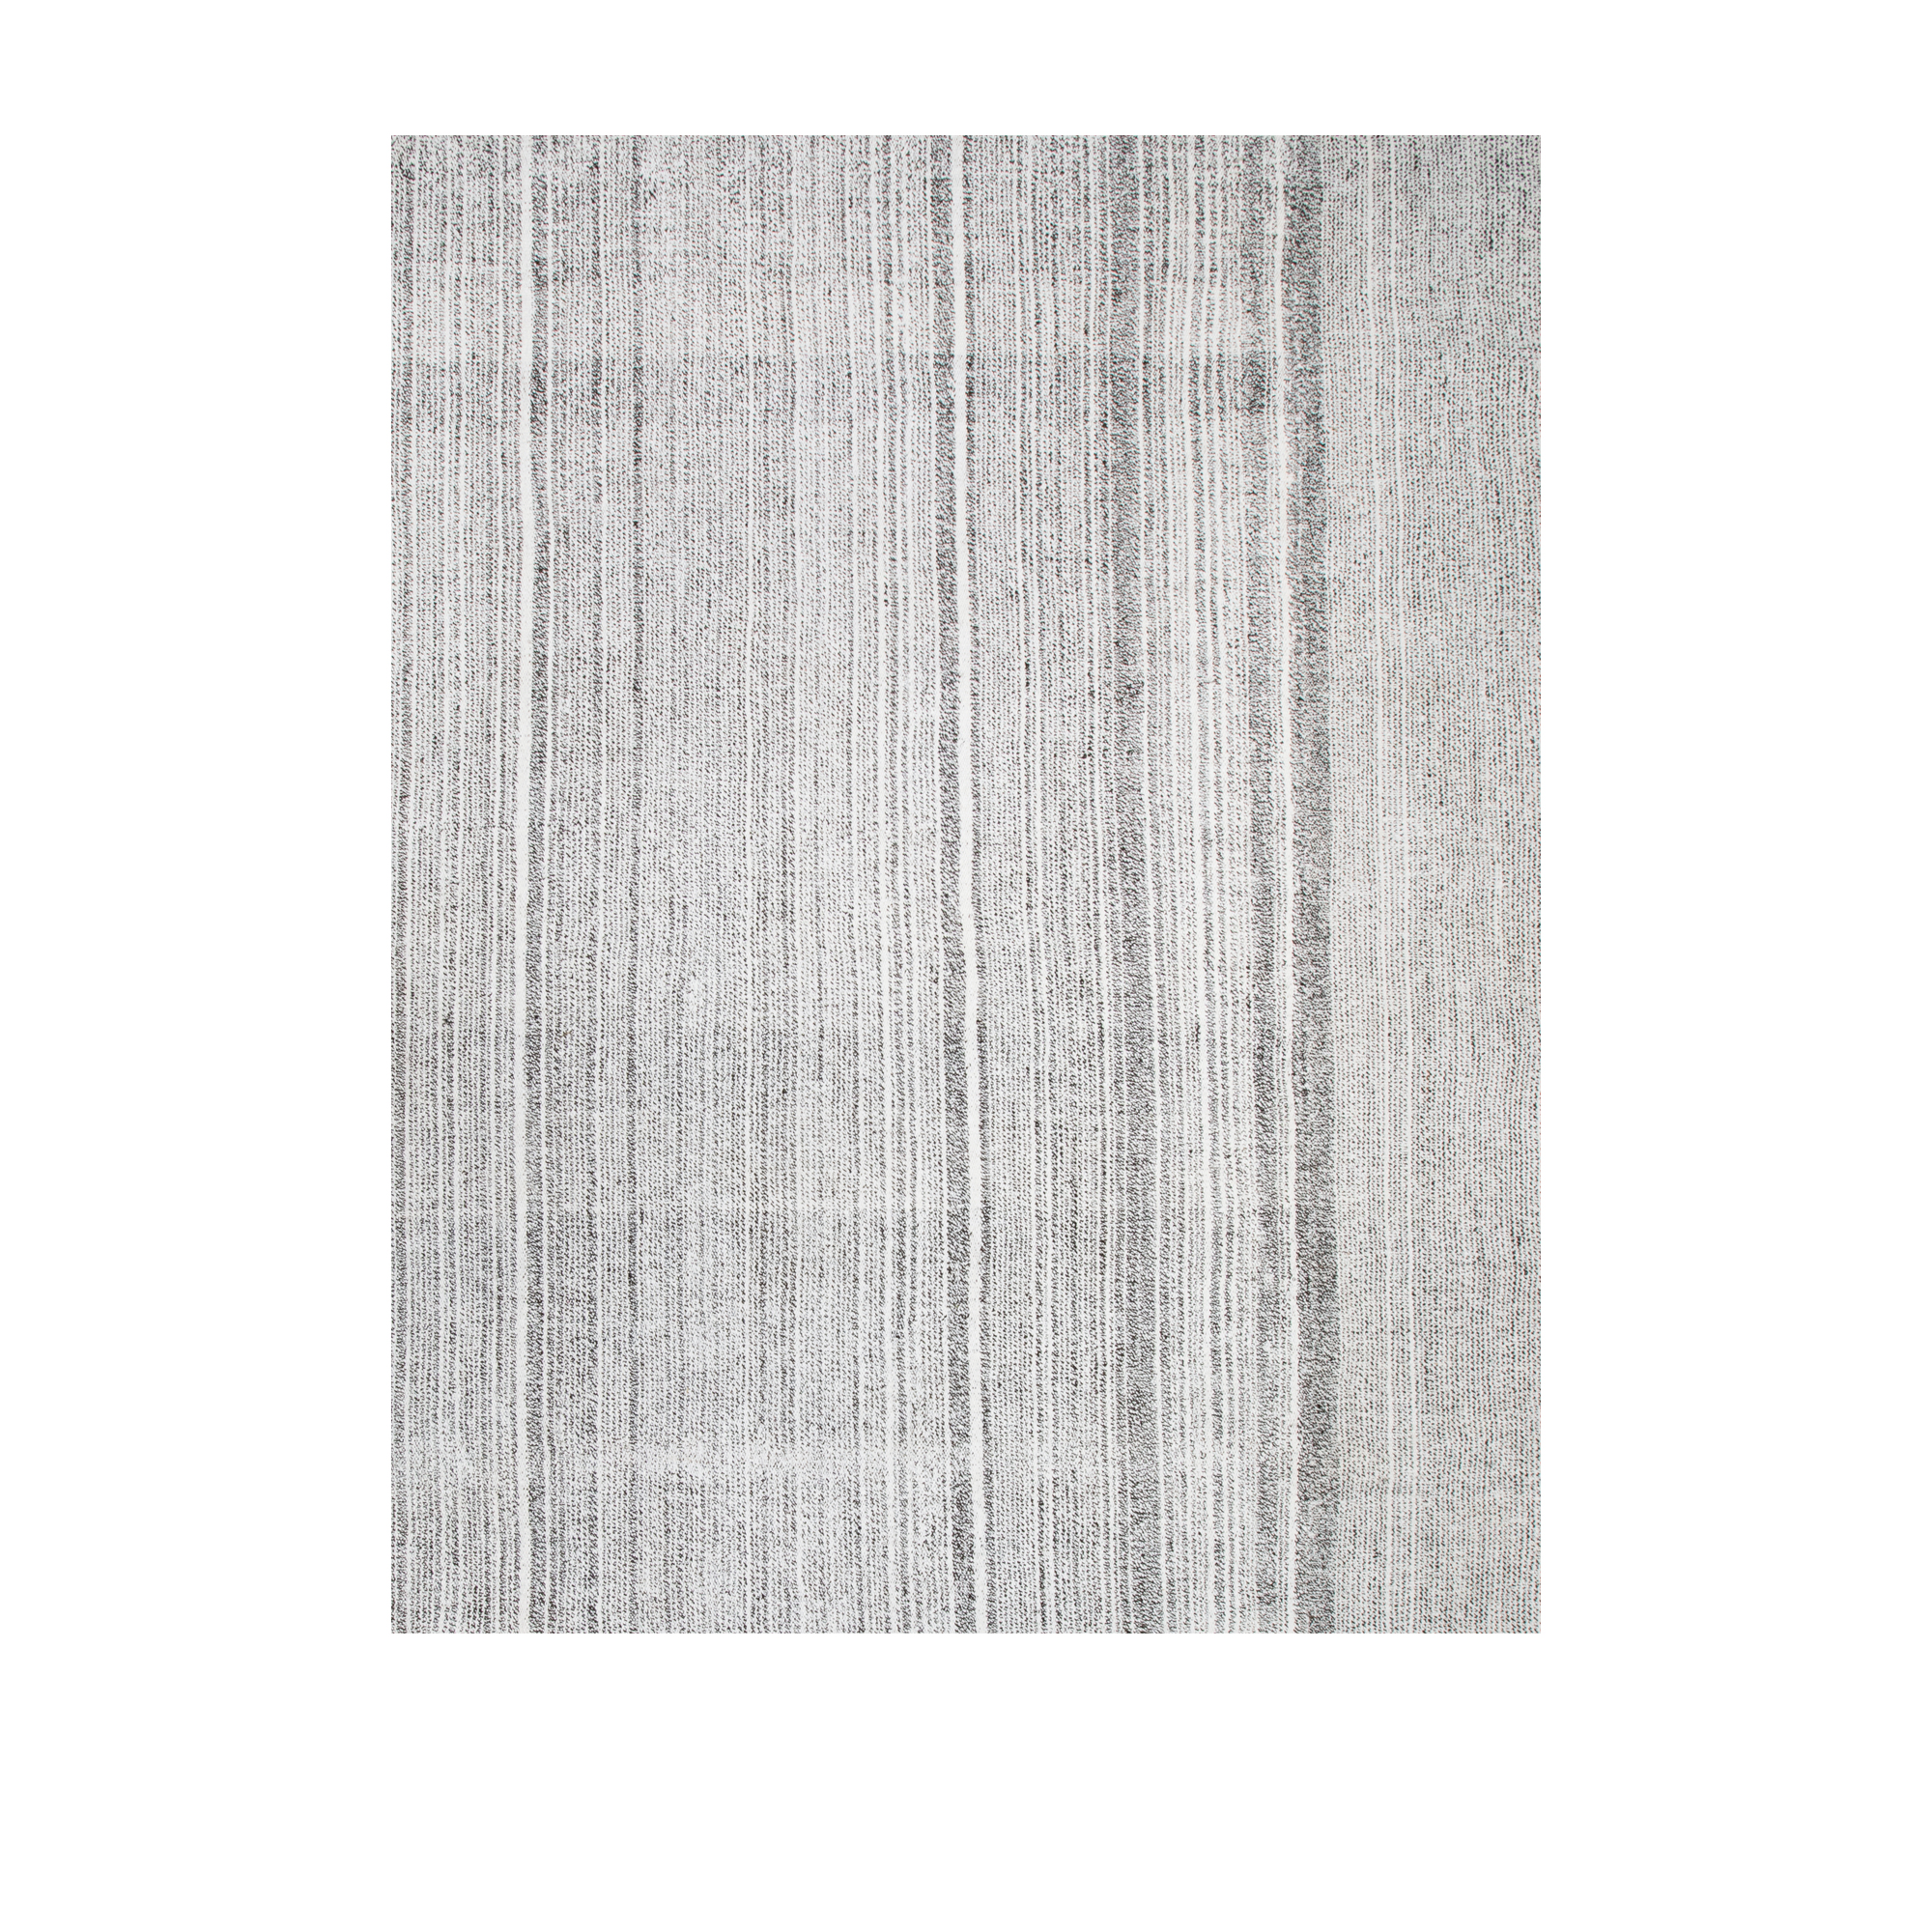 This Mid-century rug is a vintage, hand-woven Persian rug crafted with handspun wool and cotton. 